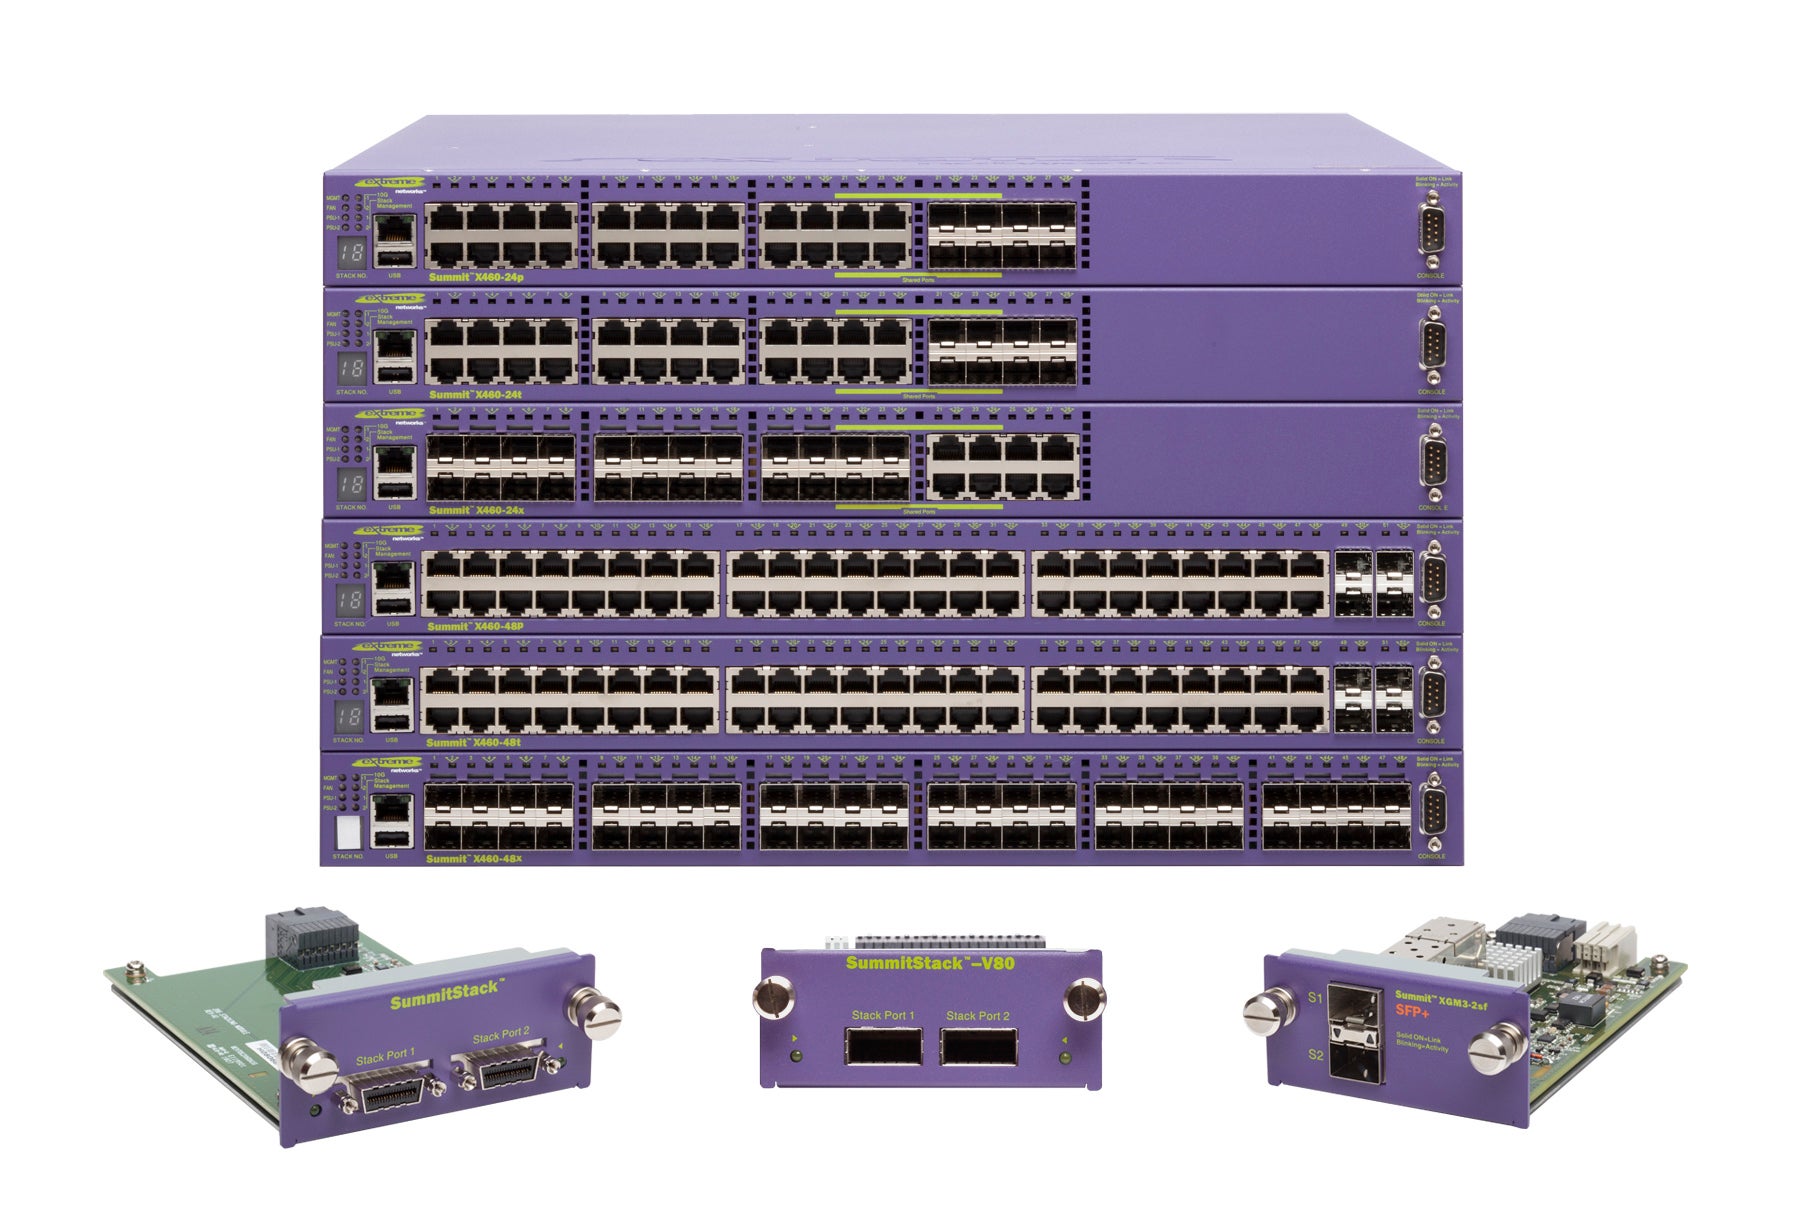 Extreme networks' summit router